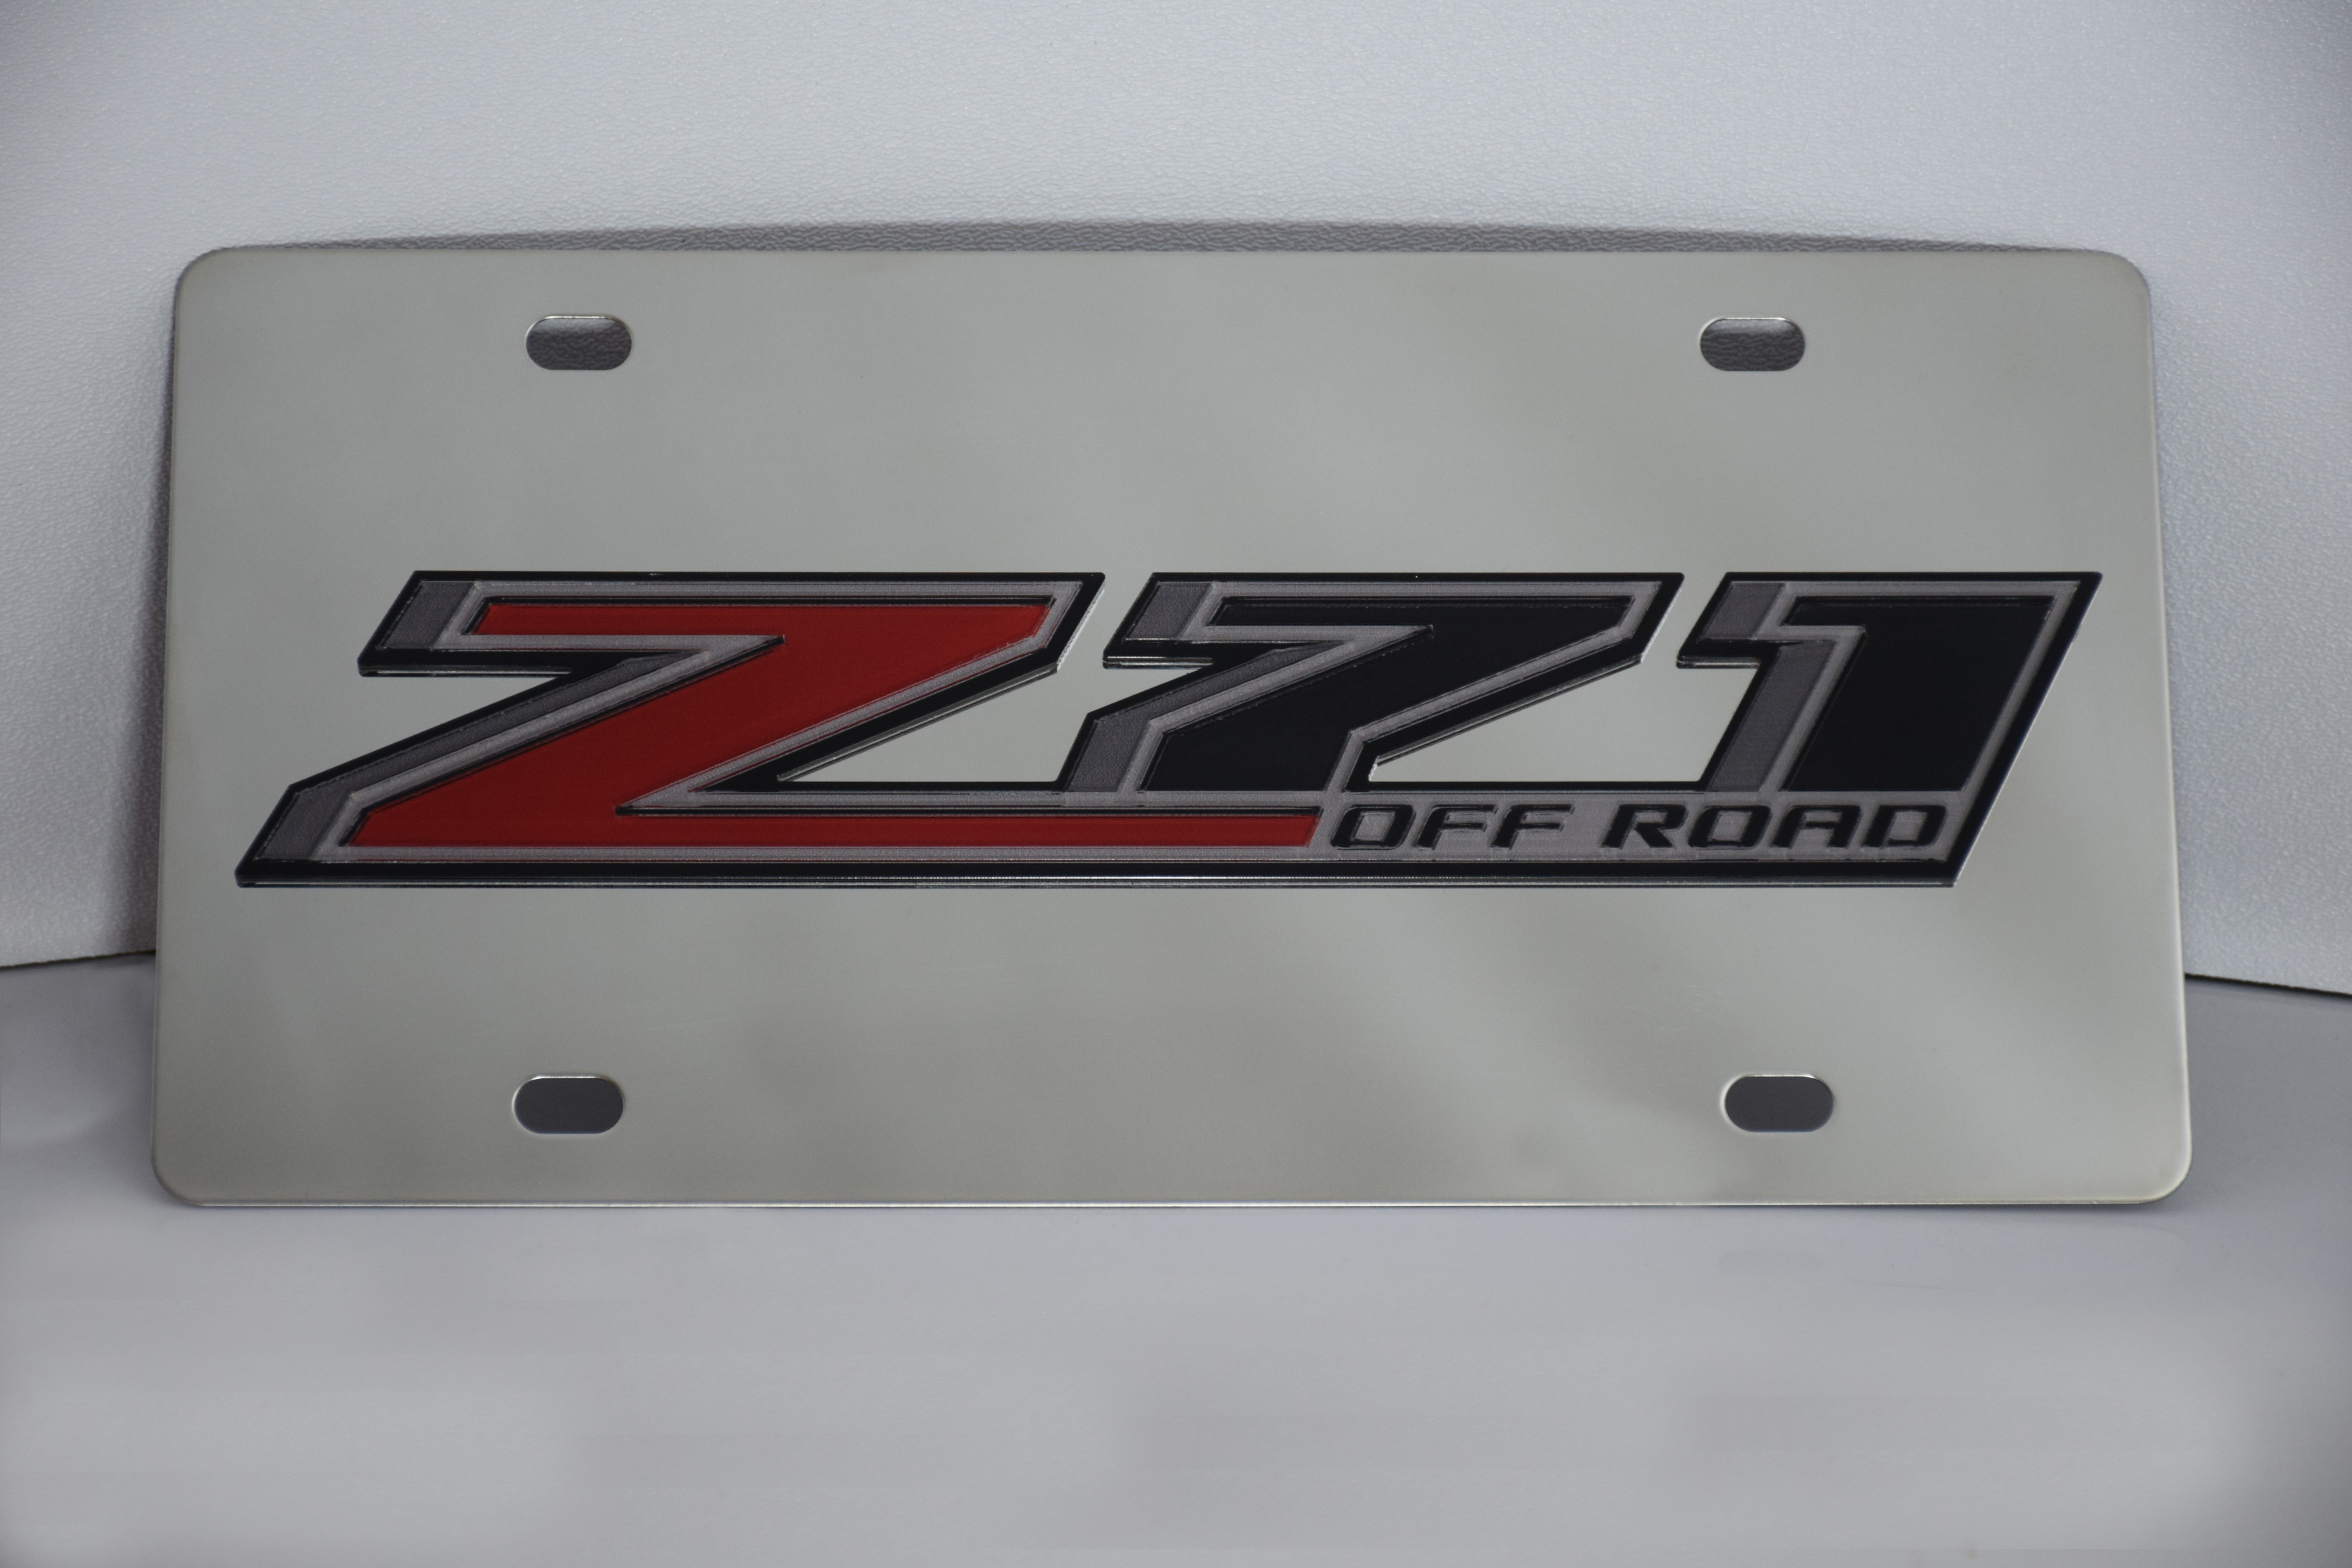 Stainless Steel Plate- Chevrolet Z71 Offroad Badge - Plates